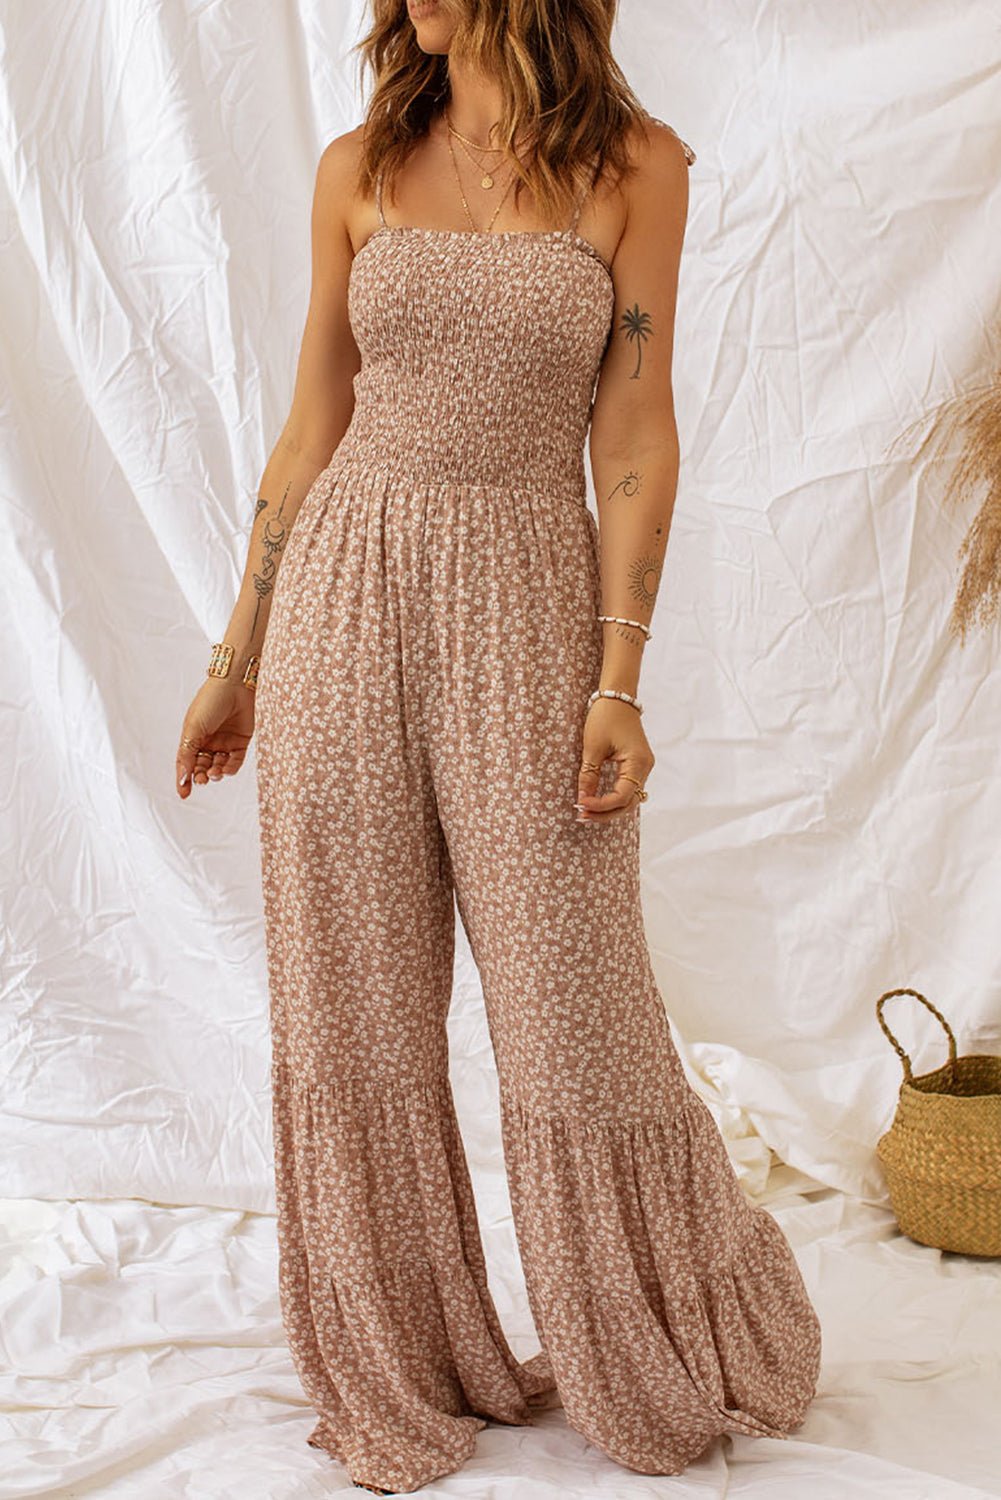 Floral Spaghetti Strap Smocked Wide Leg Jumpsuit - Awaken your Inner Romantic with Ethereal Charm - Effortlessly Embrace Whimsical Beauty - Guy Christopher